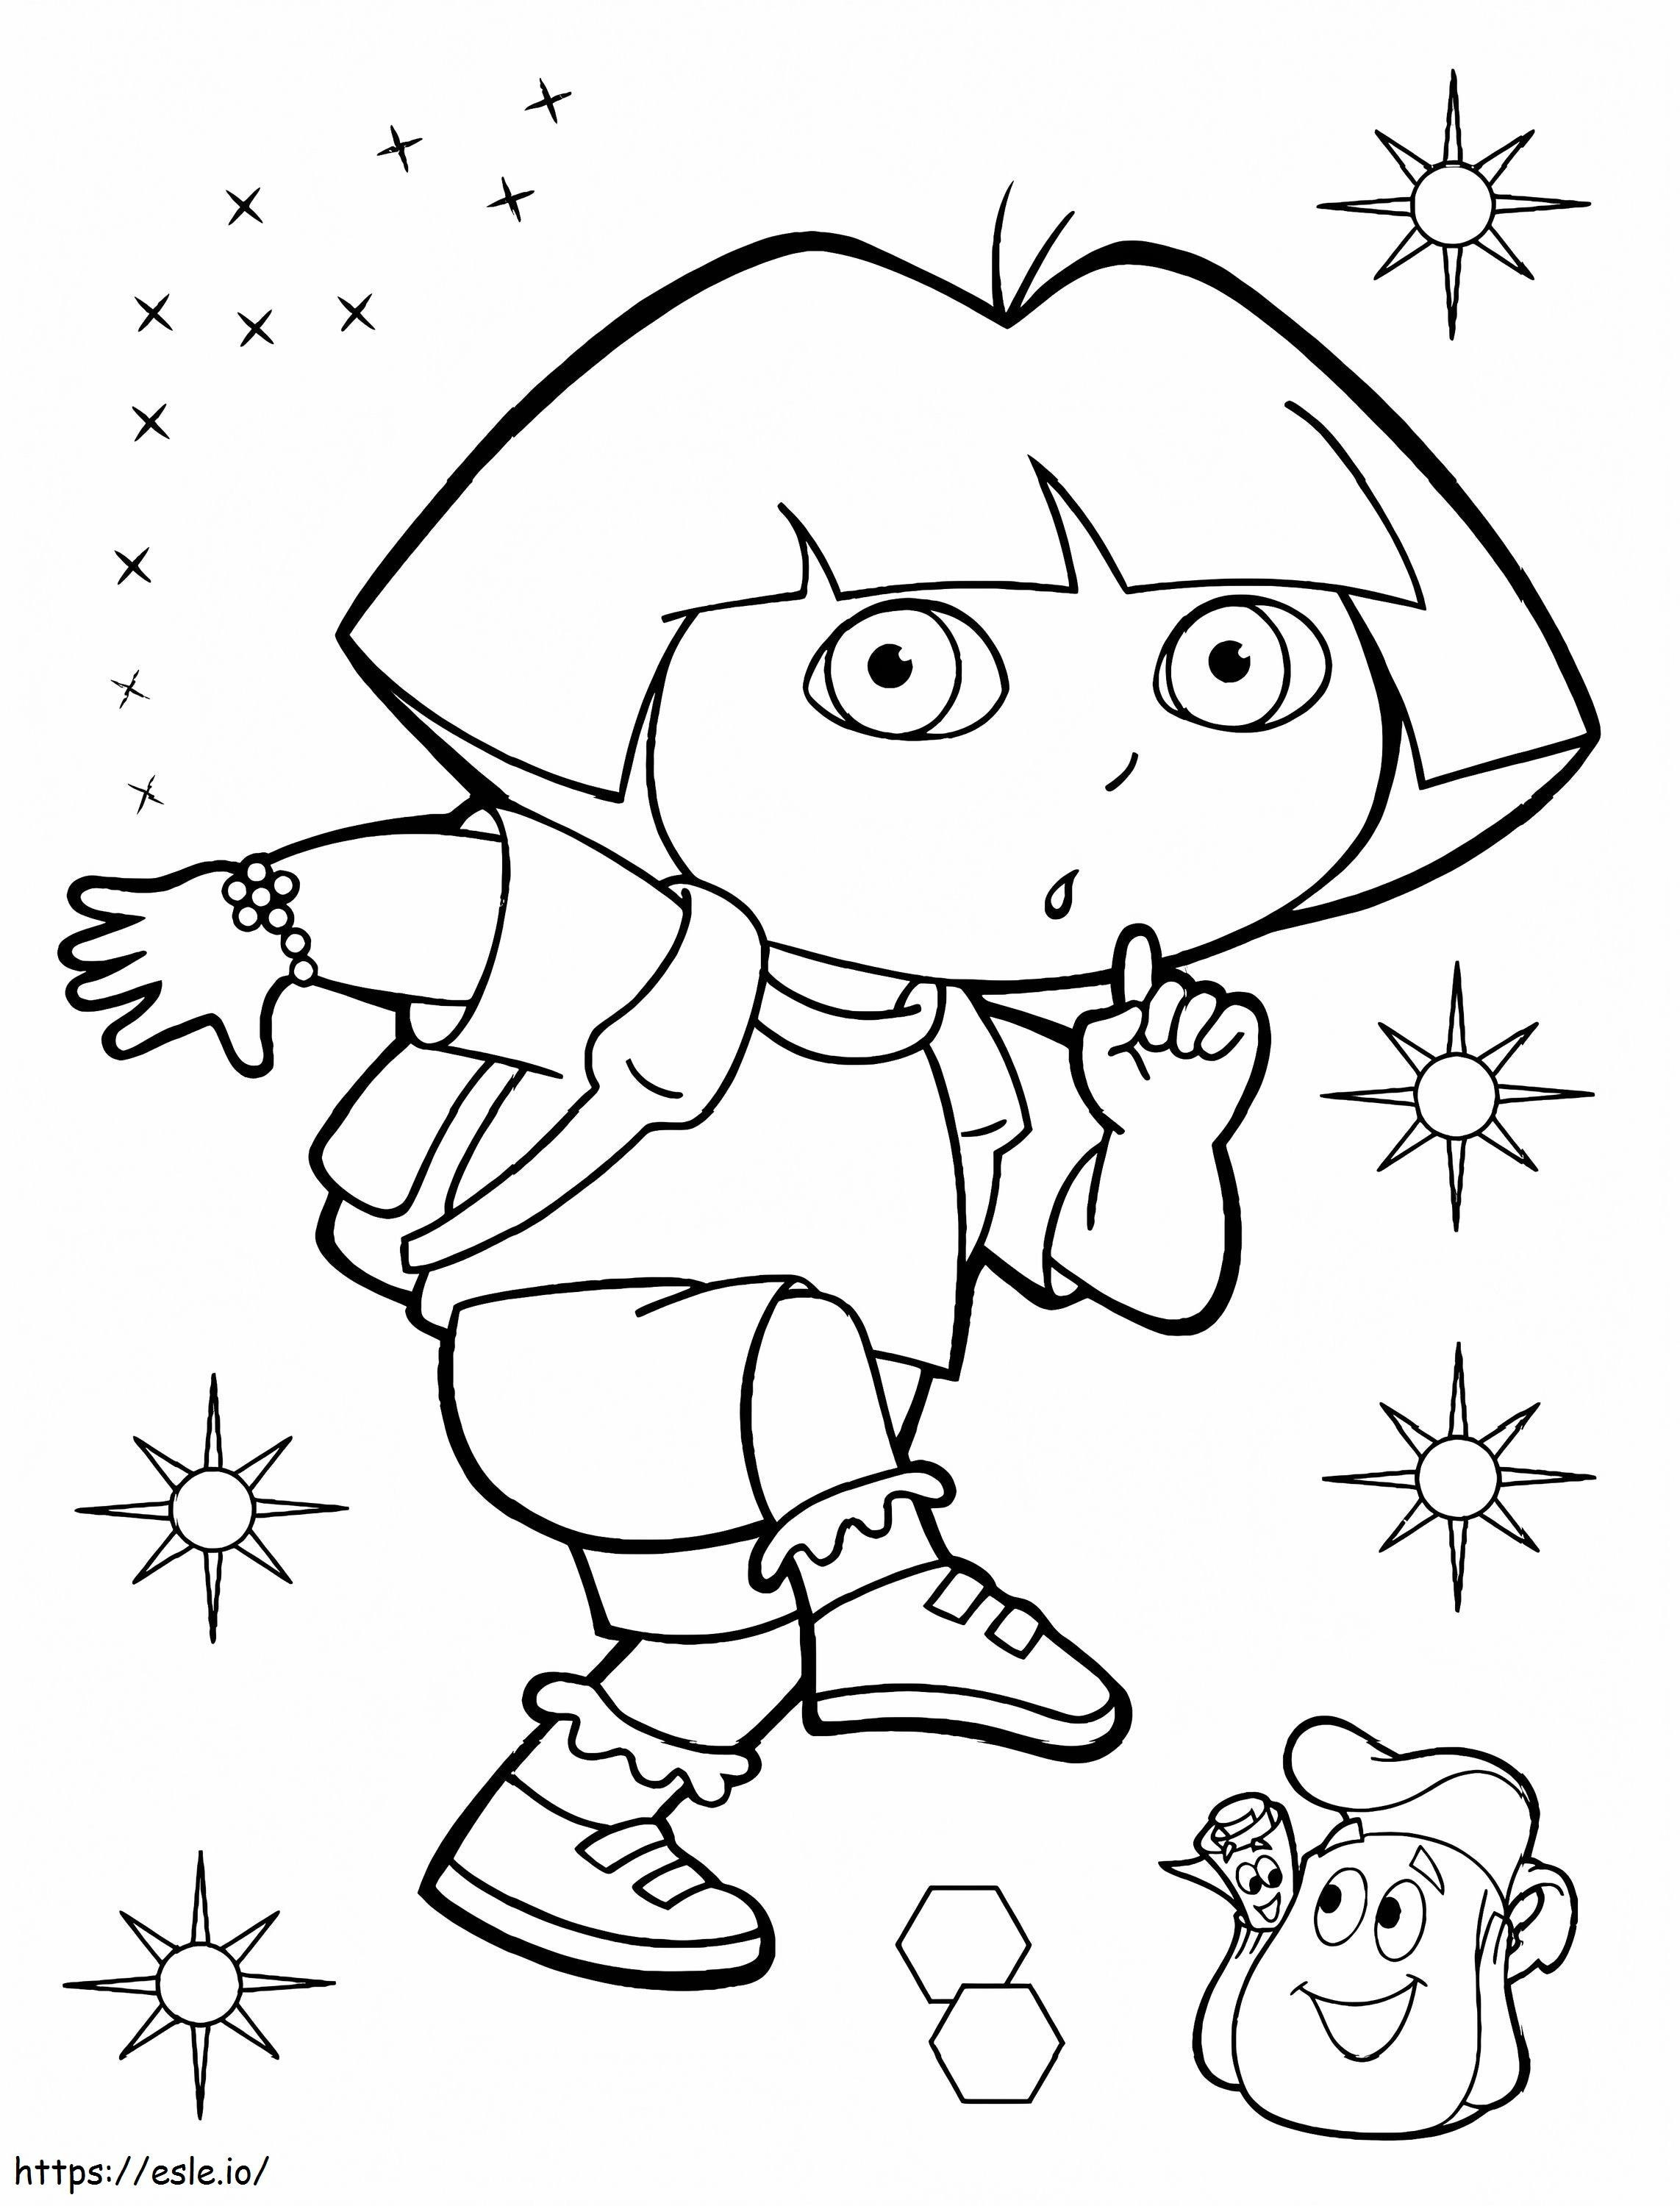 1580872964 Coloring For Kids Dora The Explorer 25130 coloring page